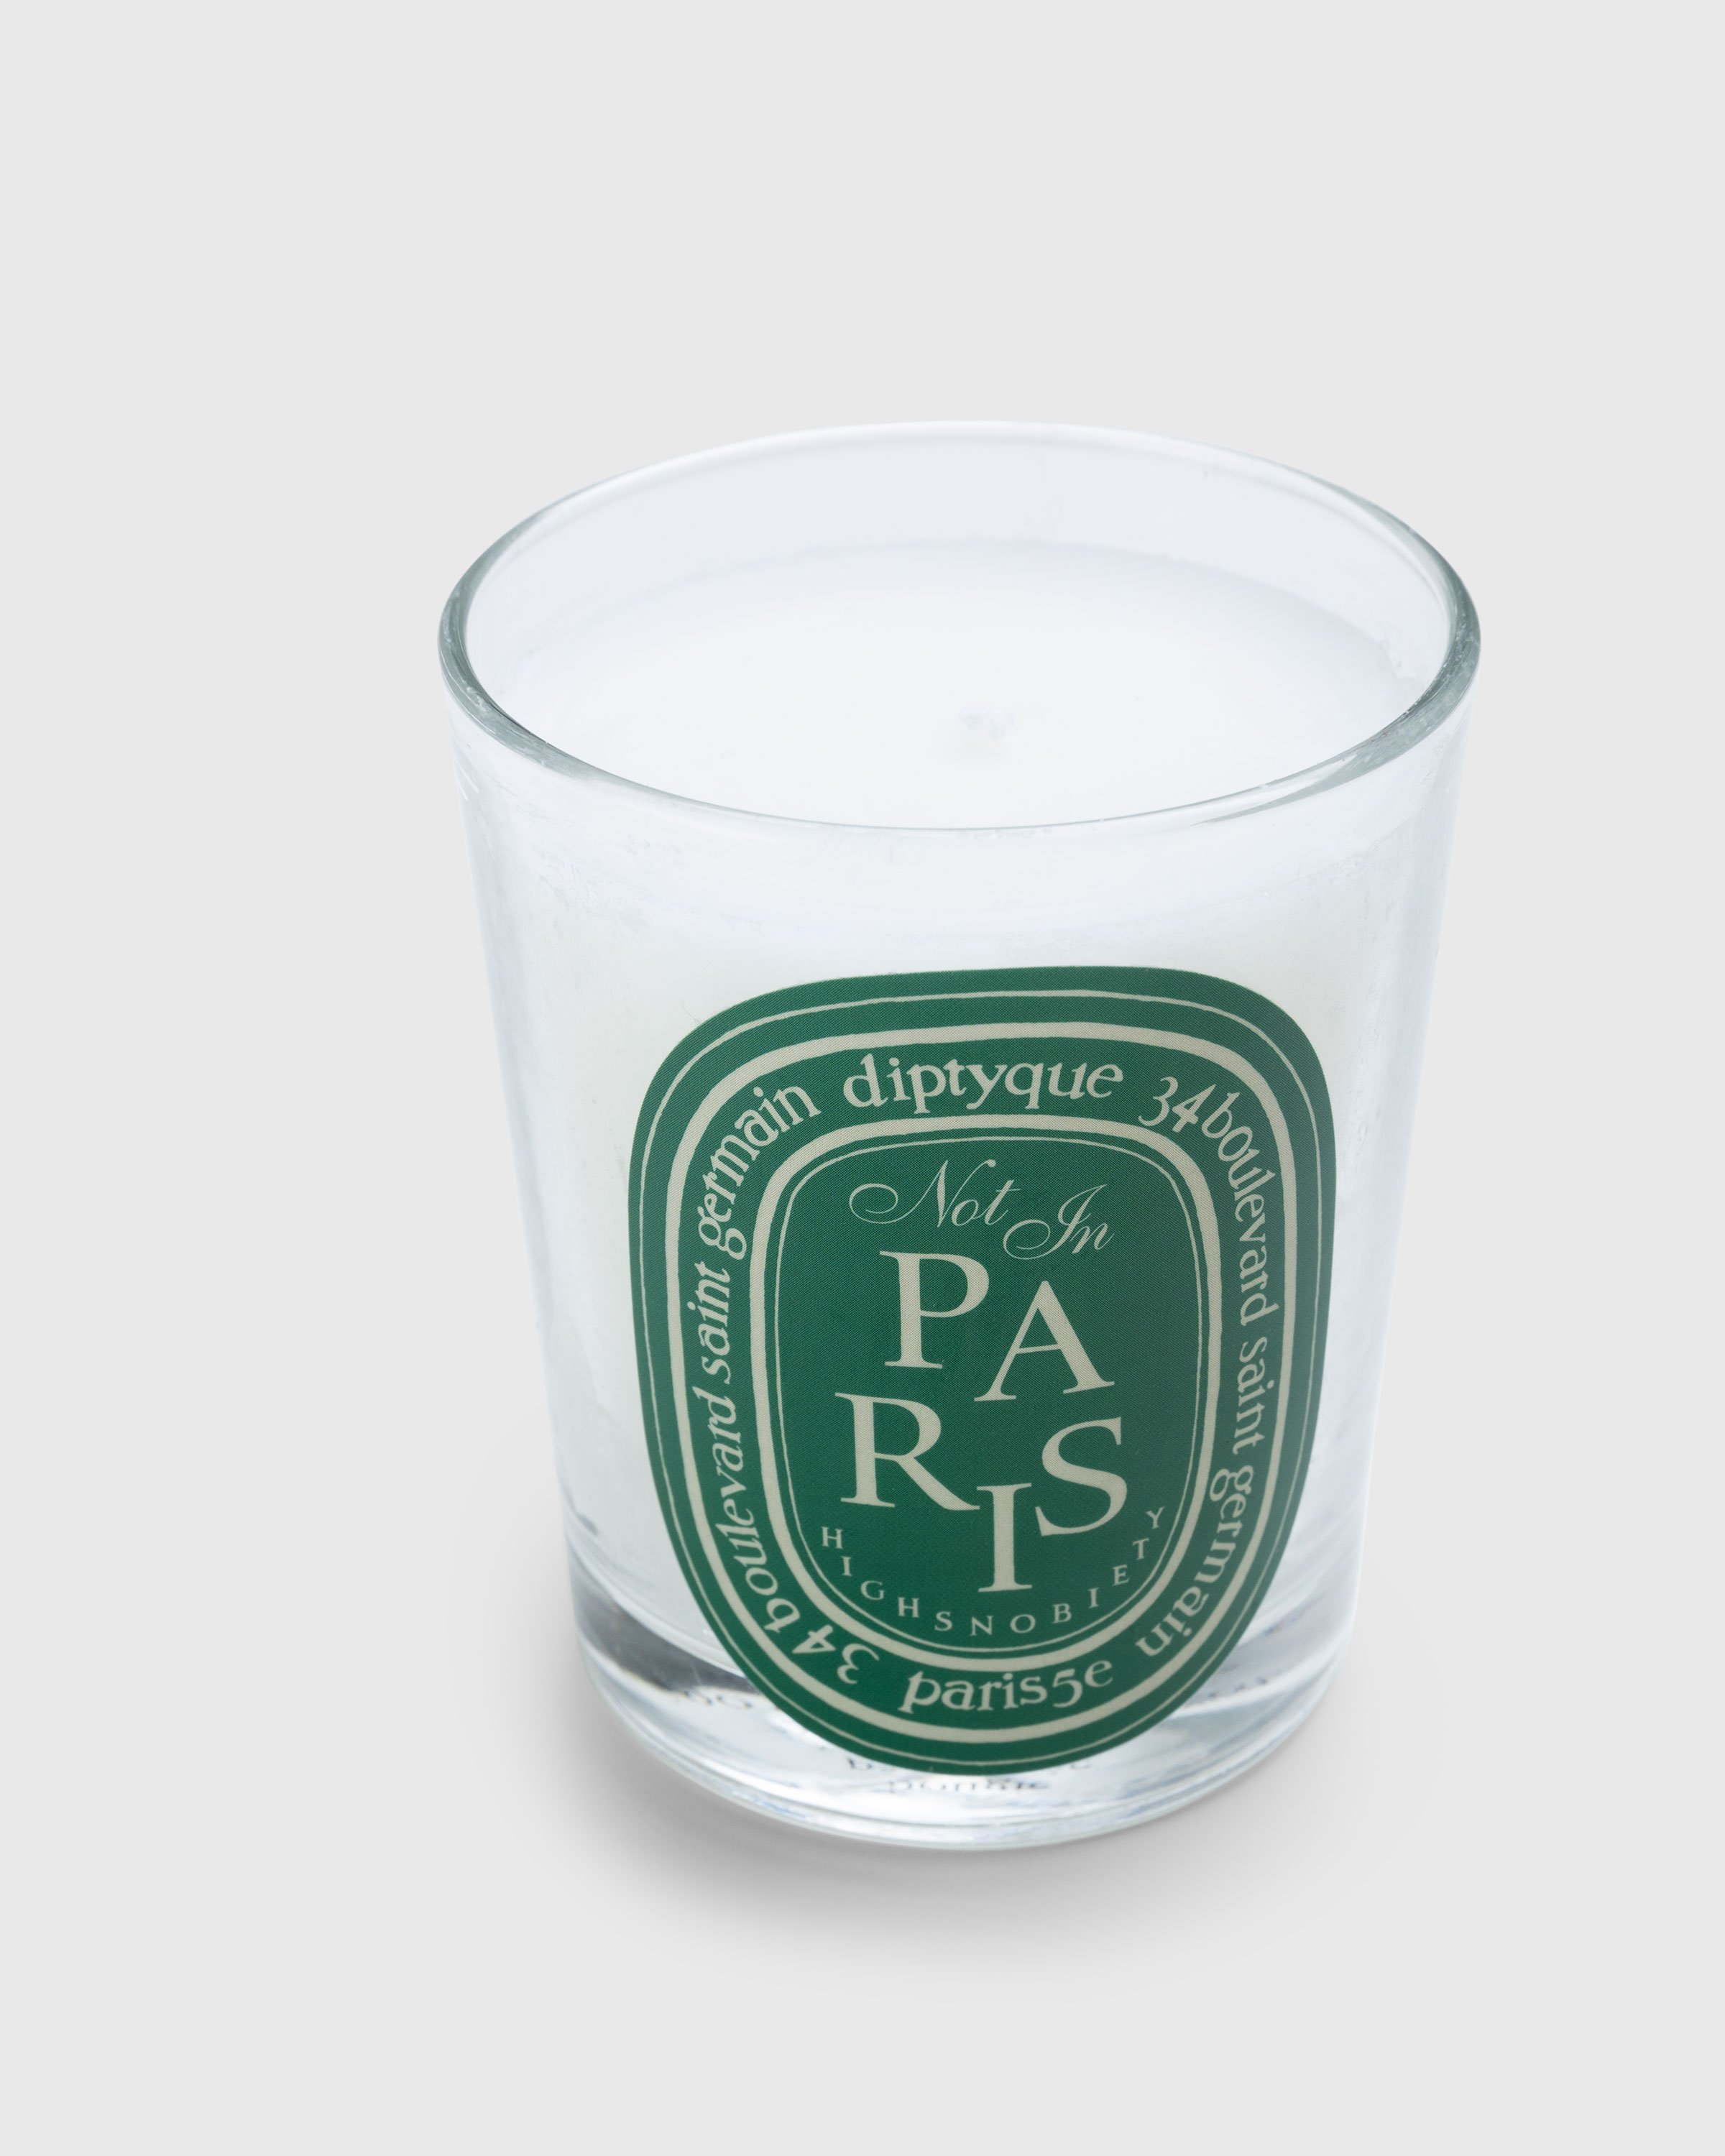 Diptyque x Highsnobiety - Not In Paris Bougie Candle - Lifestyle - White - Image 2